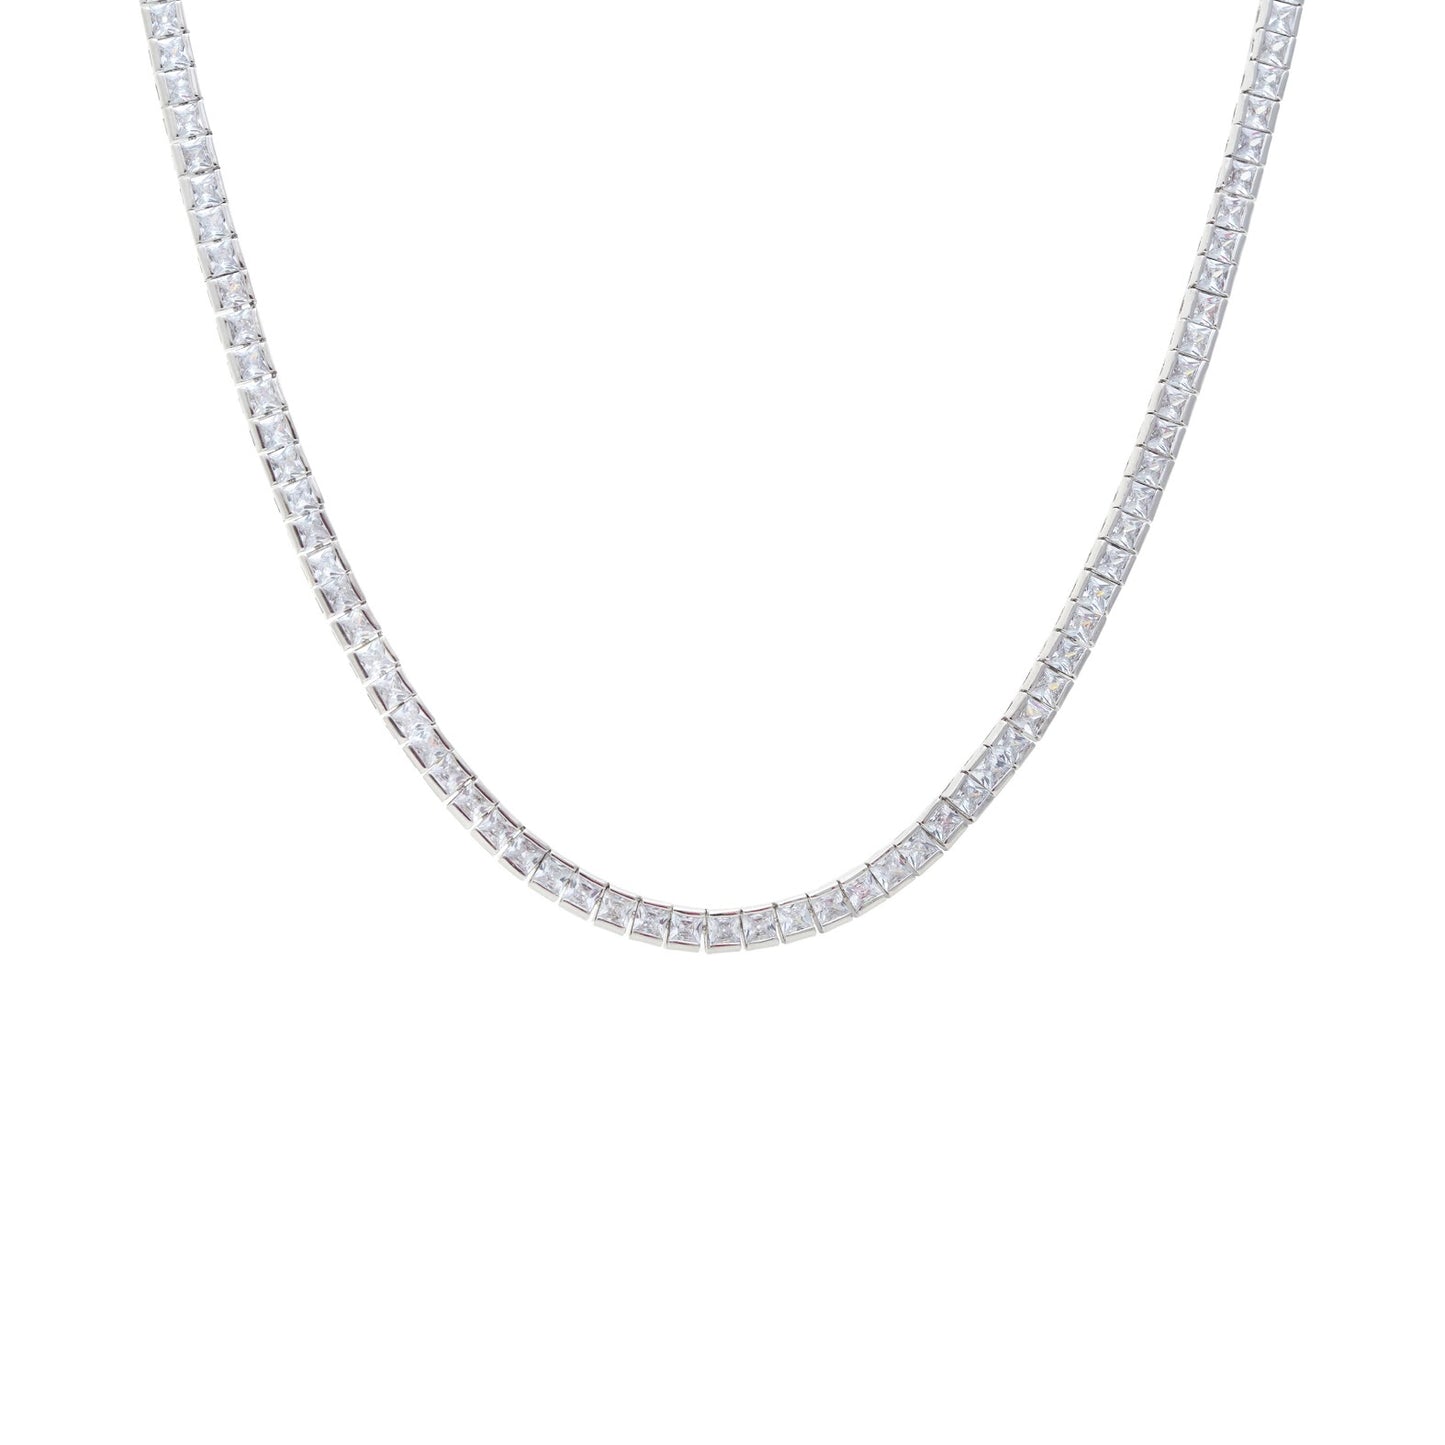 Tennis necklace with white squares zirconia 16.5 inch (Riviera)